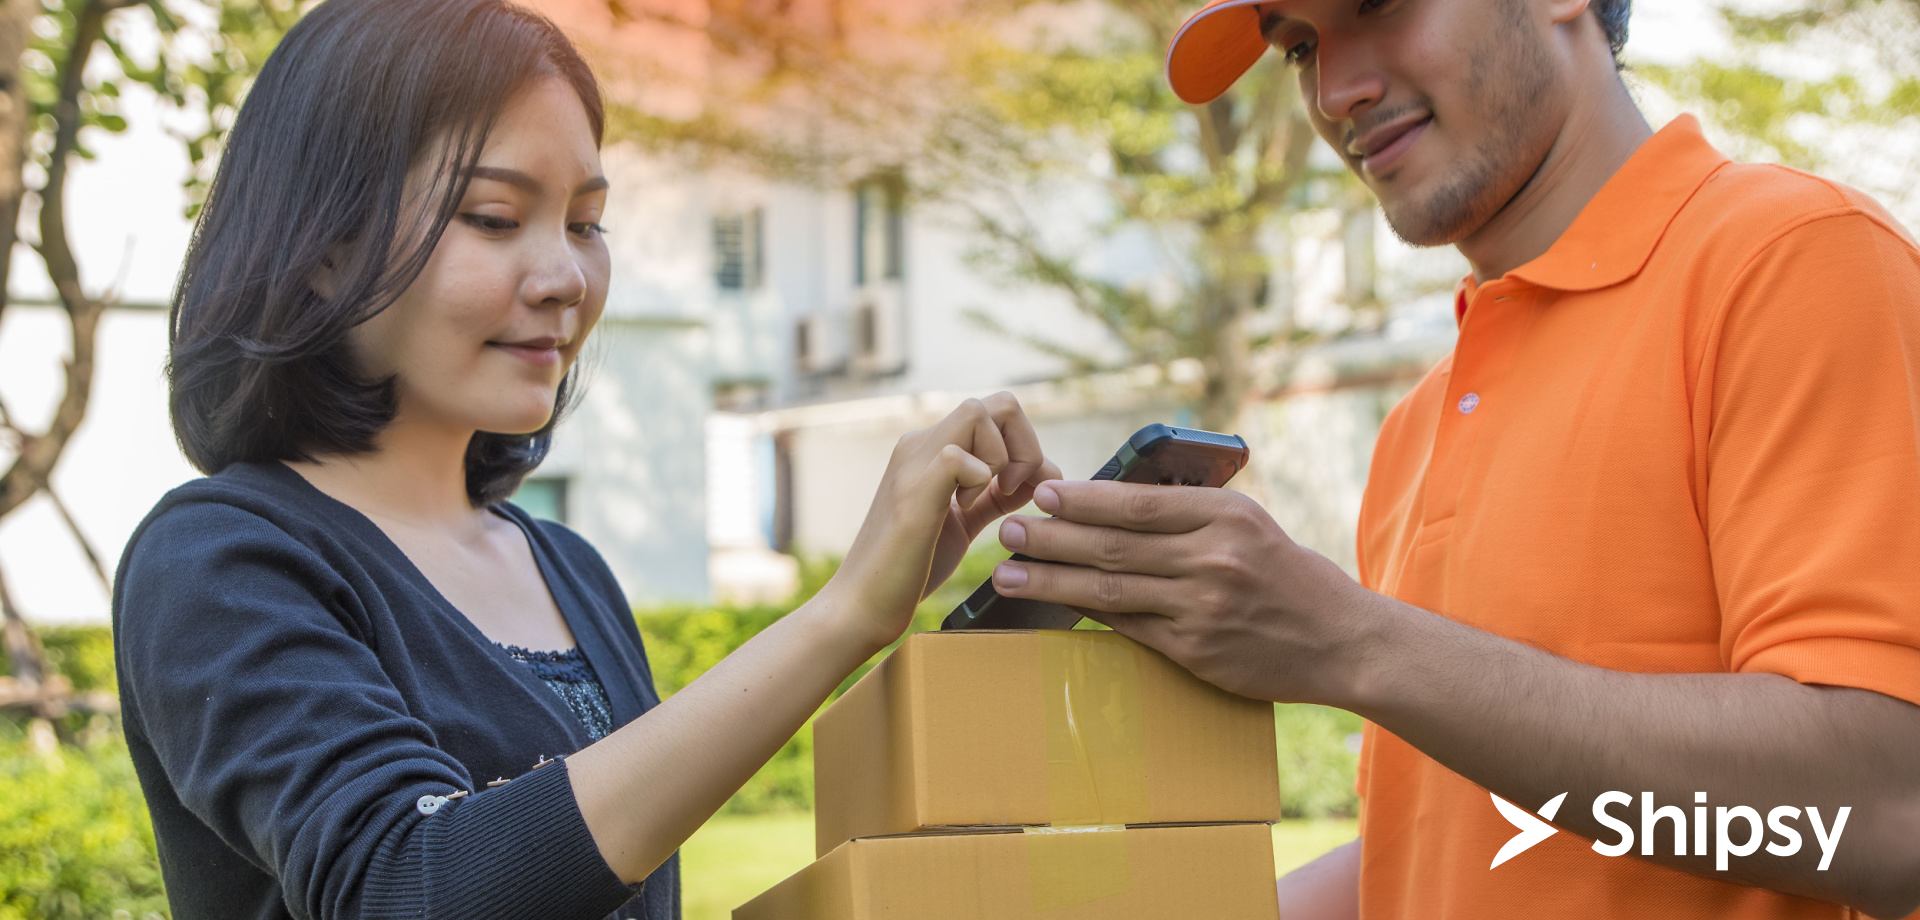 5 Costly Delivery Mistakes Every eCommerce Retailer Should Avoid 